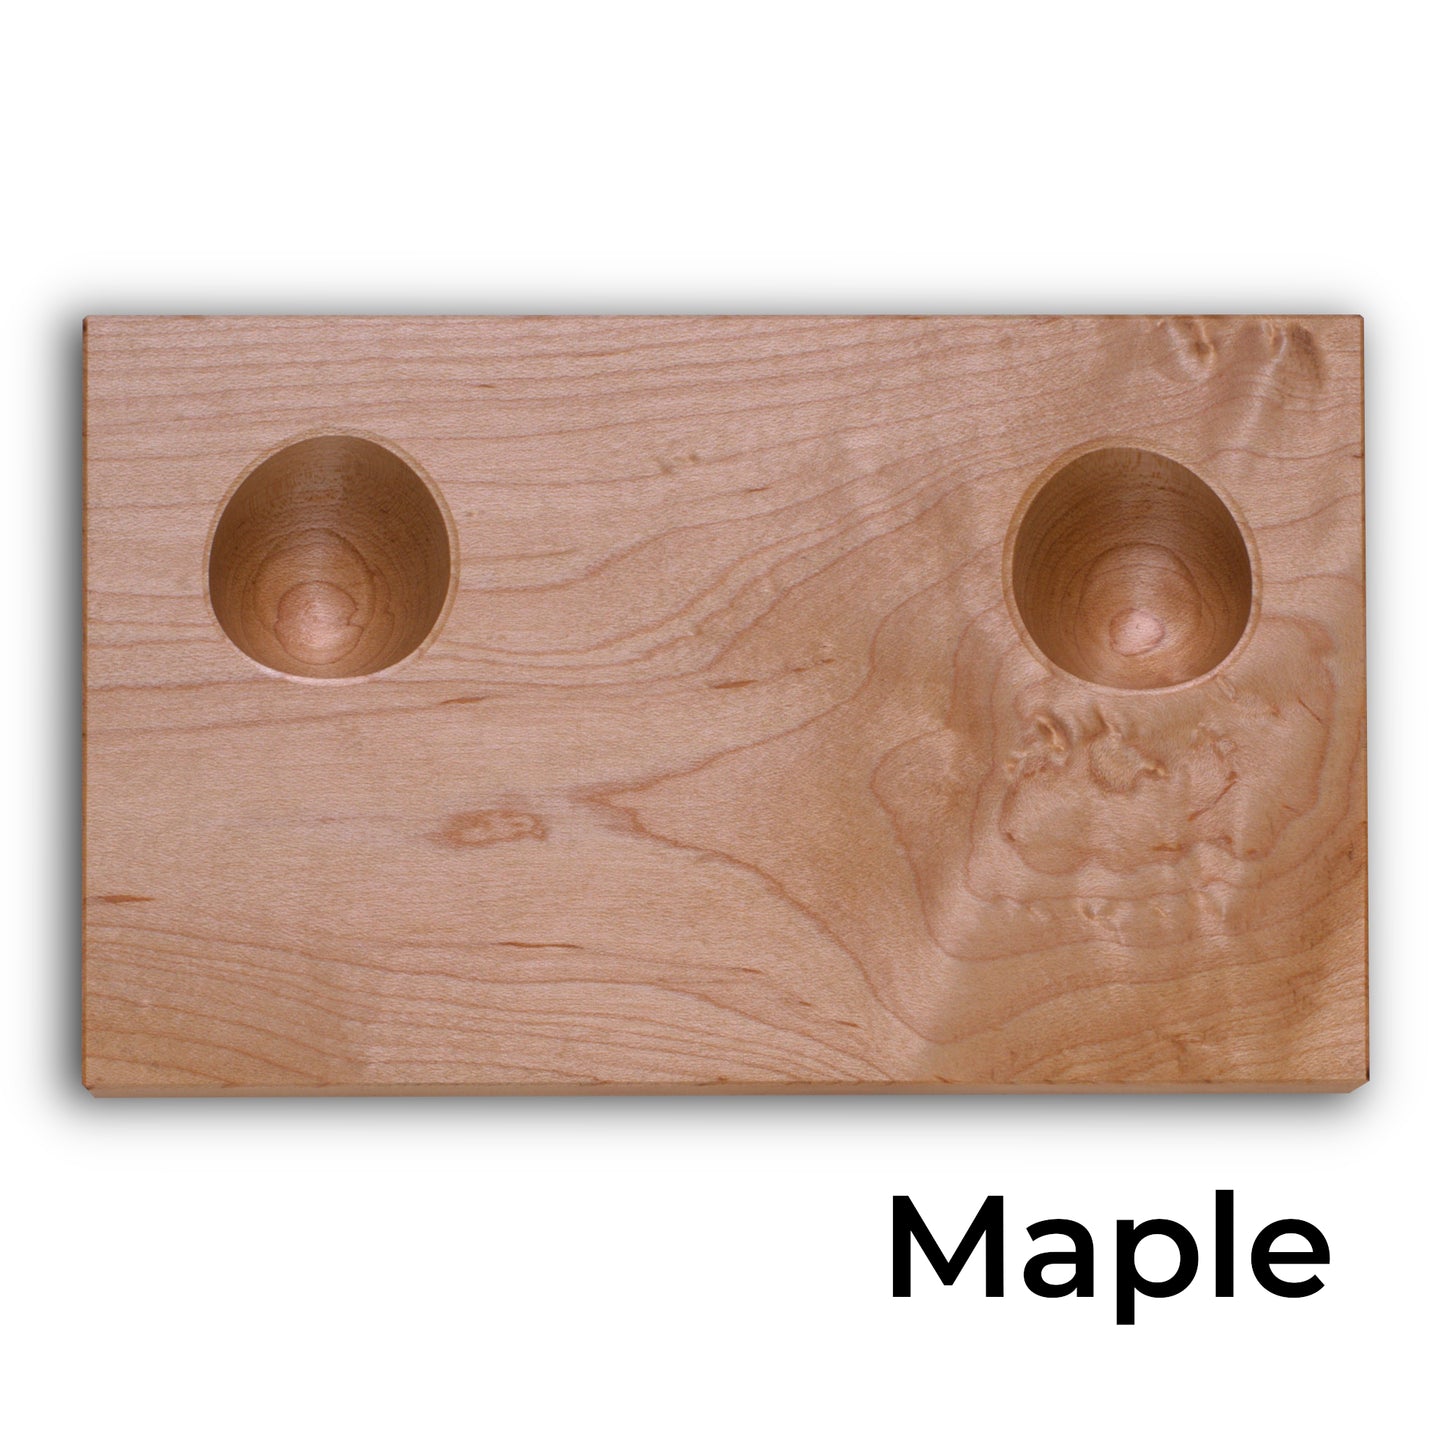 Wooden stand in maple for Playstation 4 dualshock controller